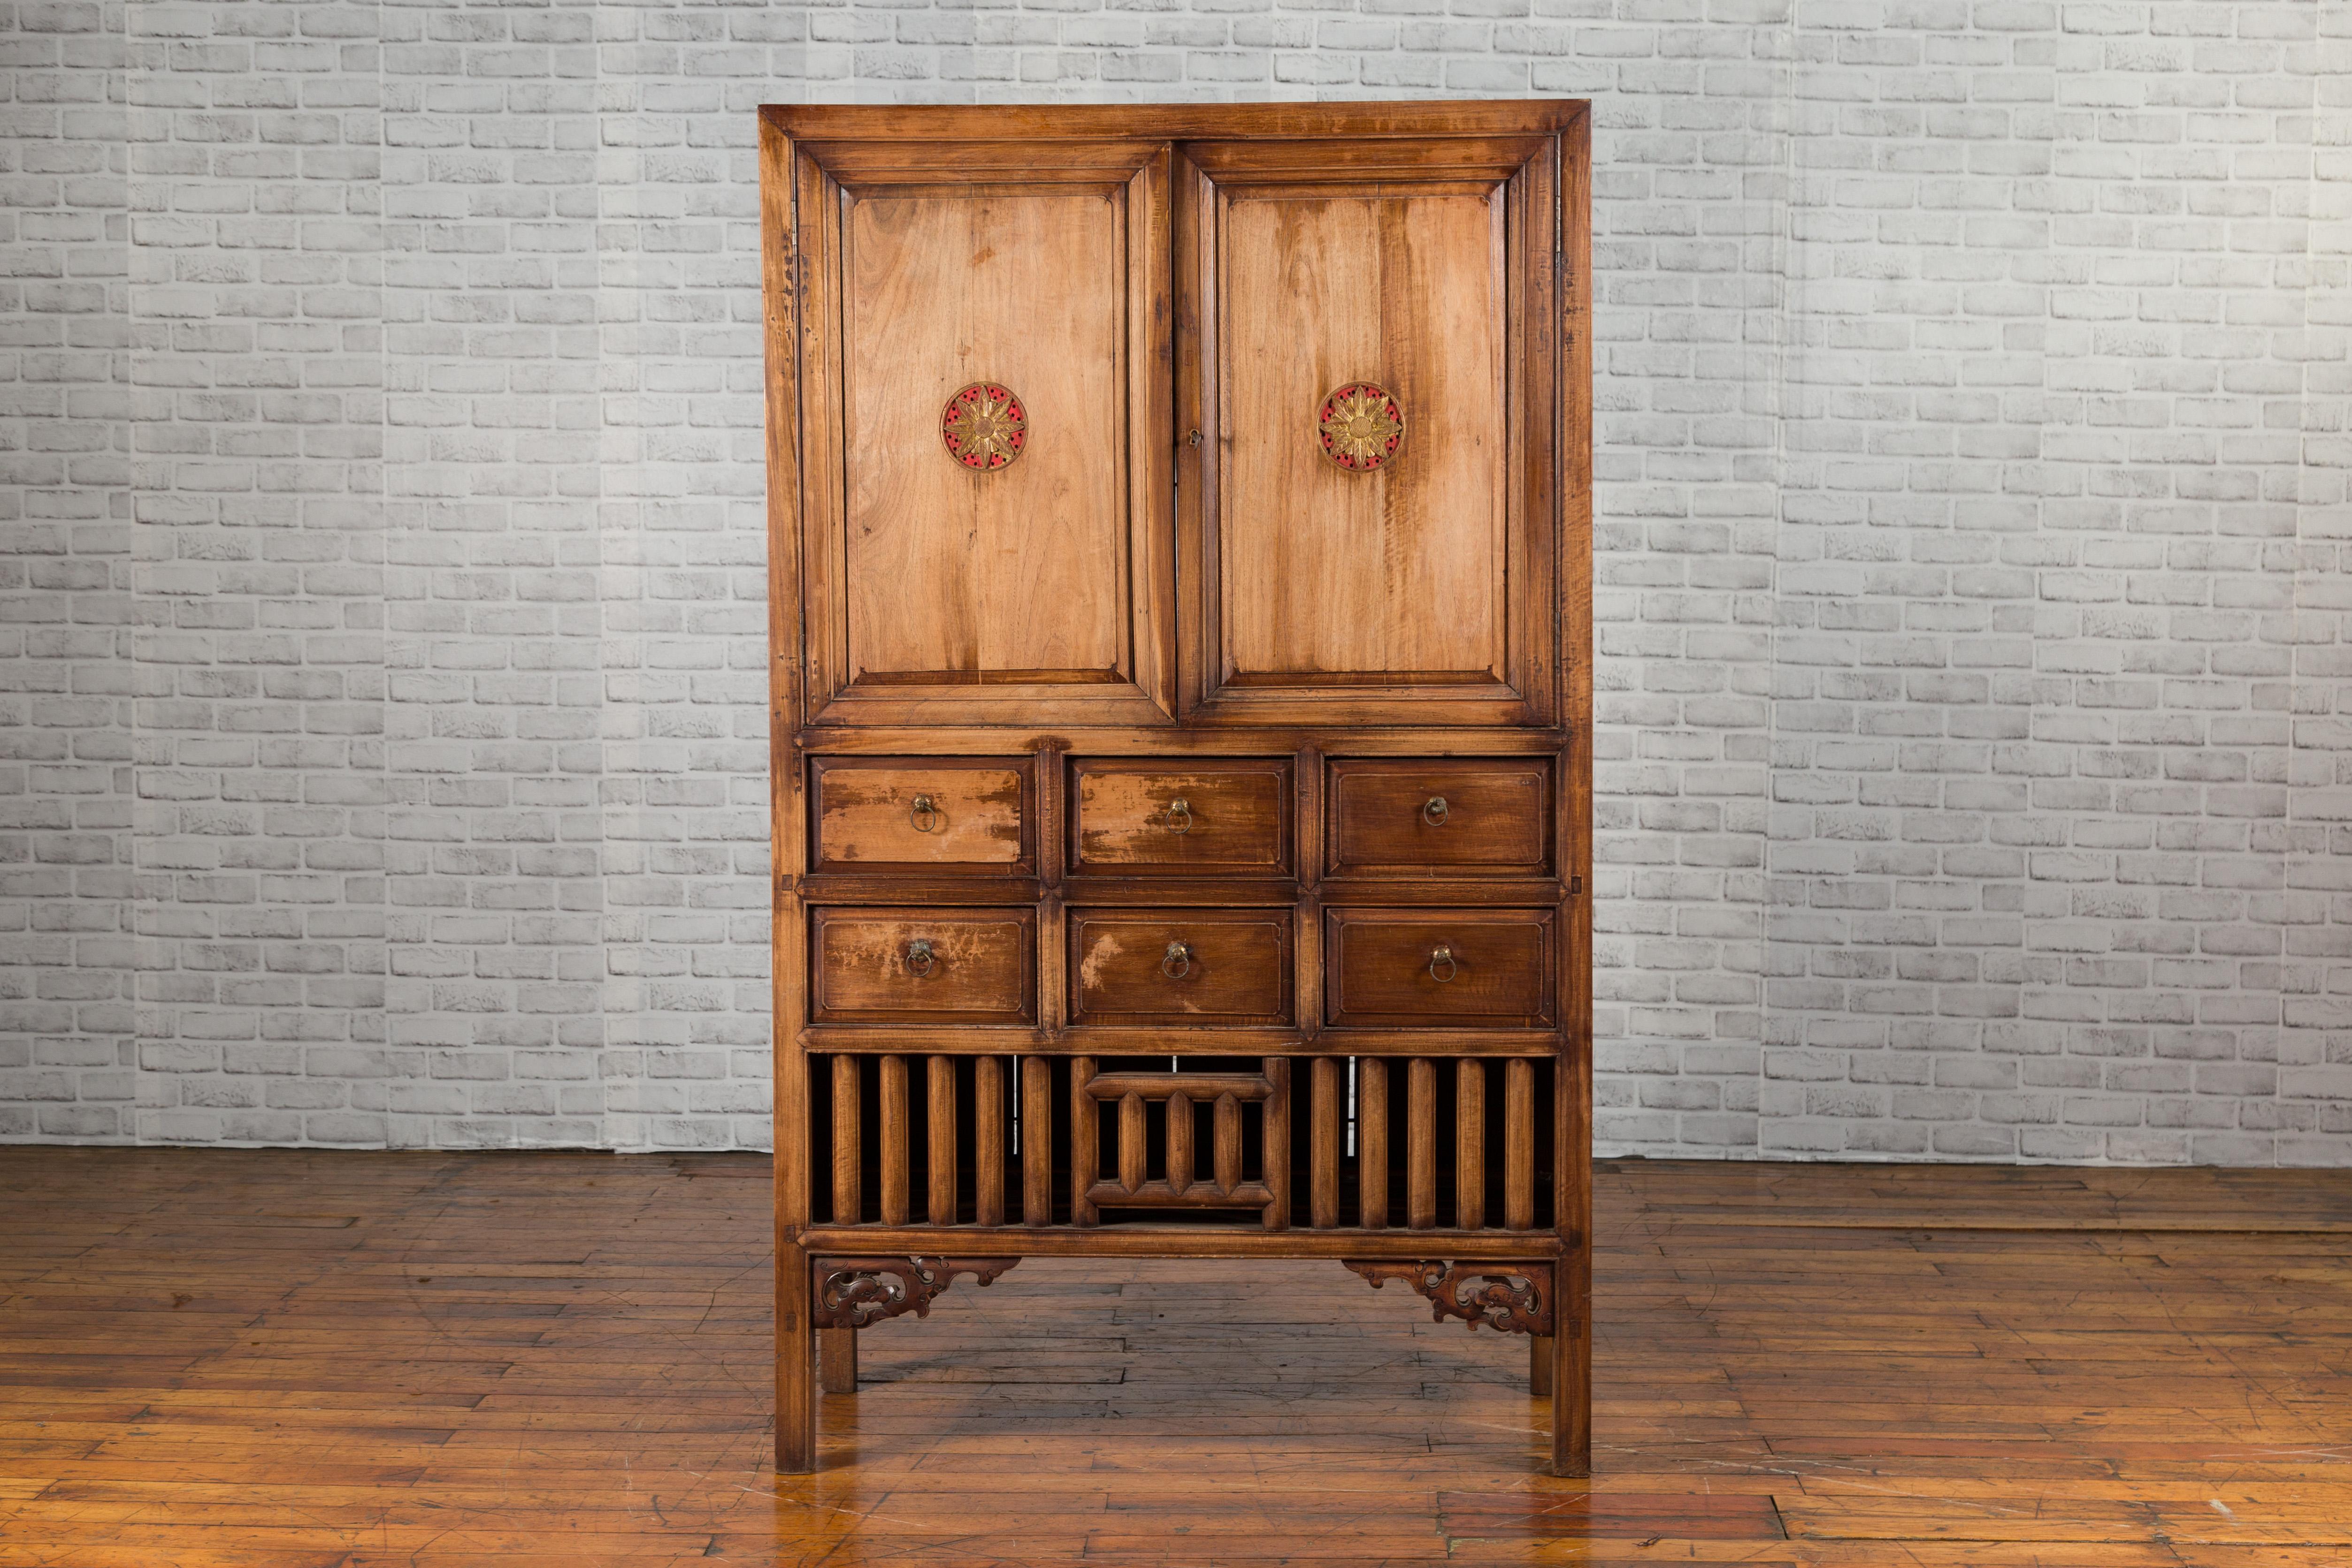 A vintage Taiwanese hand-carved and hand-painted armoire from the mid-20th century, with two doors, six drawers and floral motifs. Created during the 1960s in Taiwan, this hand-carved wooden armoire features a linear silhouette. The upper section